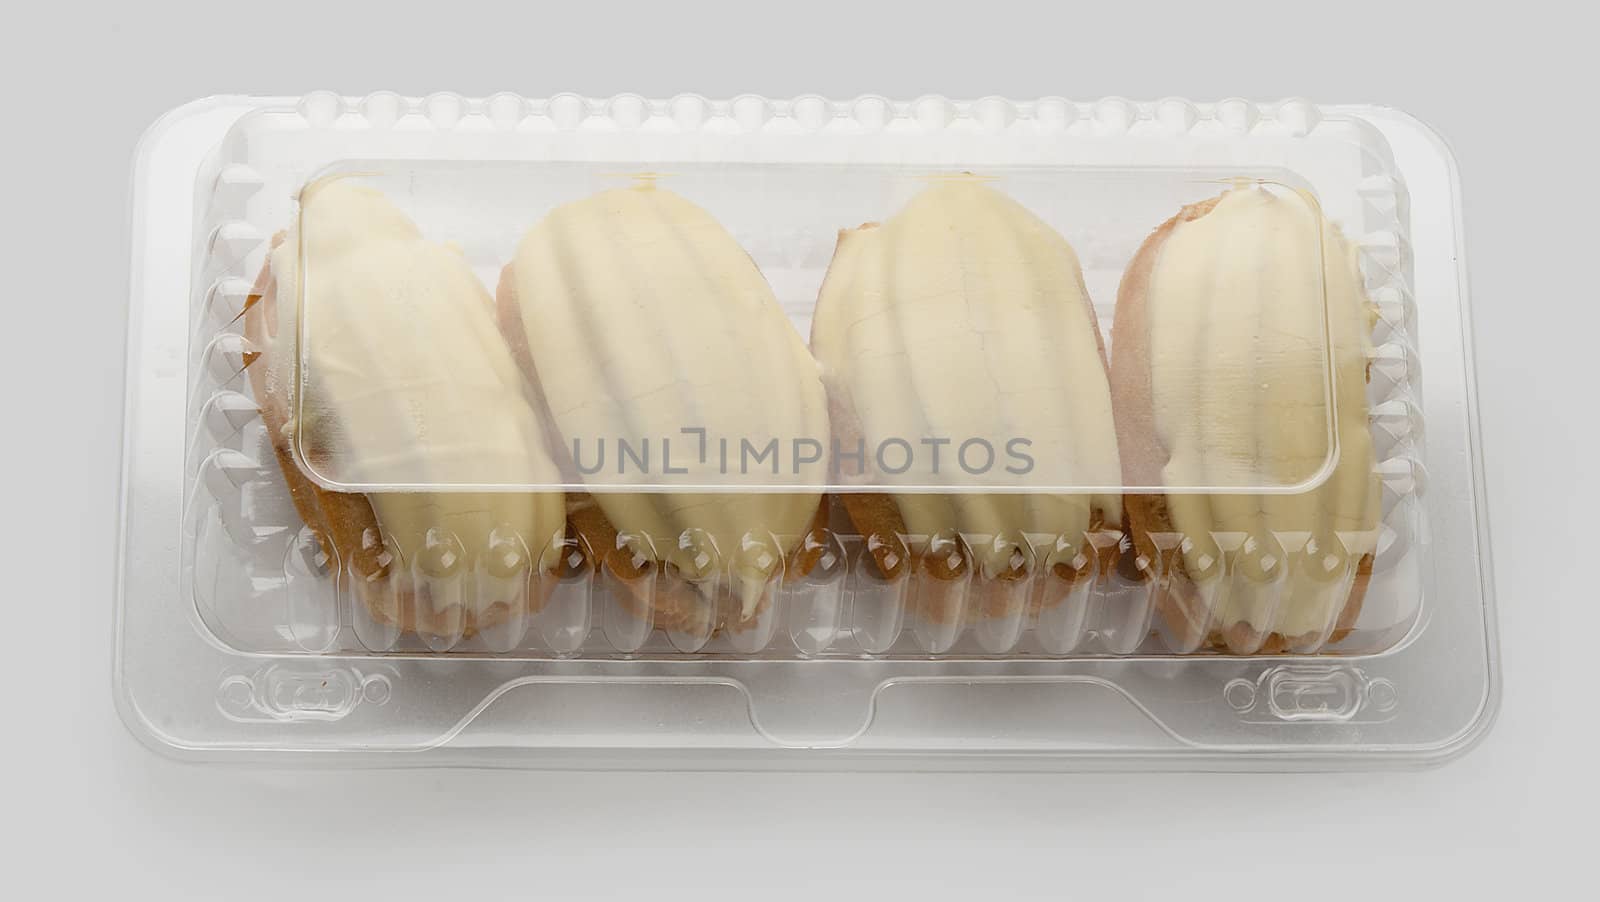 Four cream-filled French pastry in the transparent plastic box